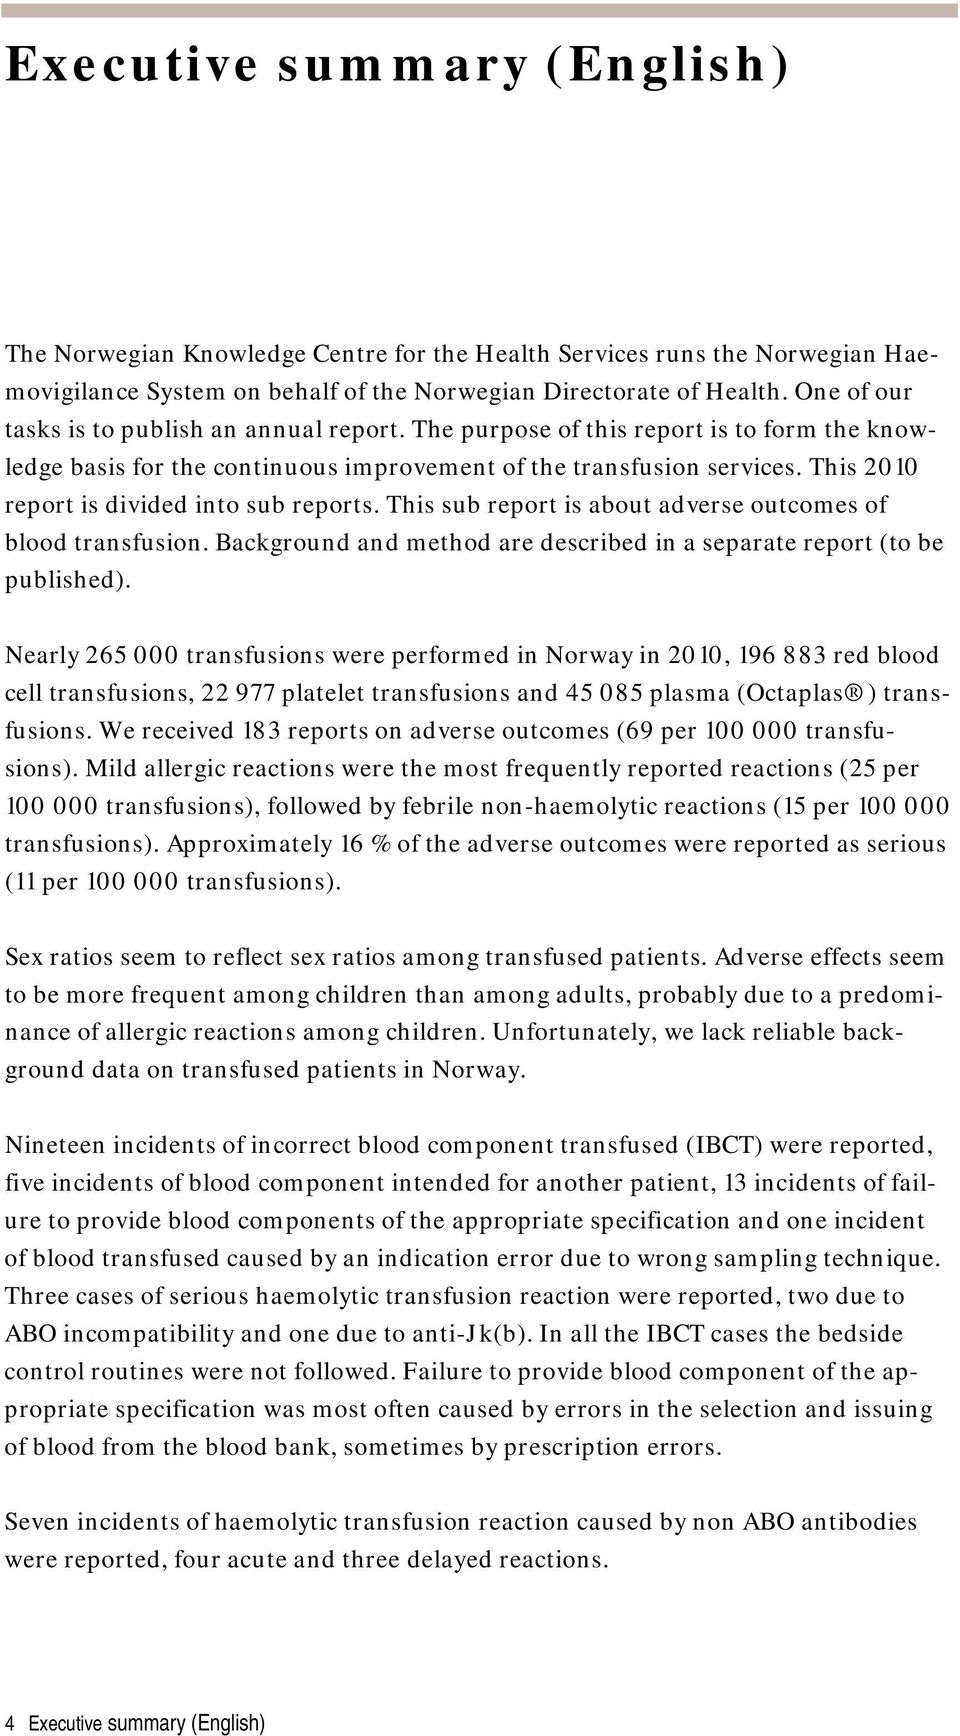 This 2010 report is divided into sub reports. This sub report is about adverse outcomes of blood transfusion. Background and method are described in a separate report (to be published).